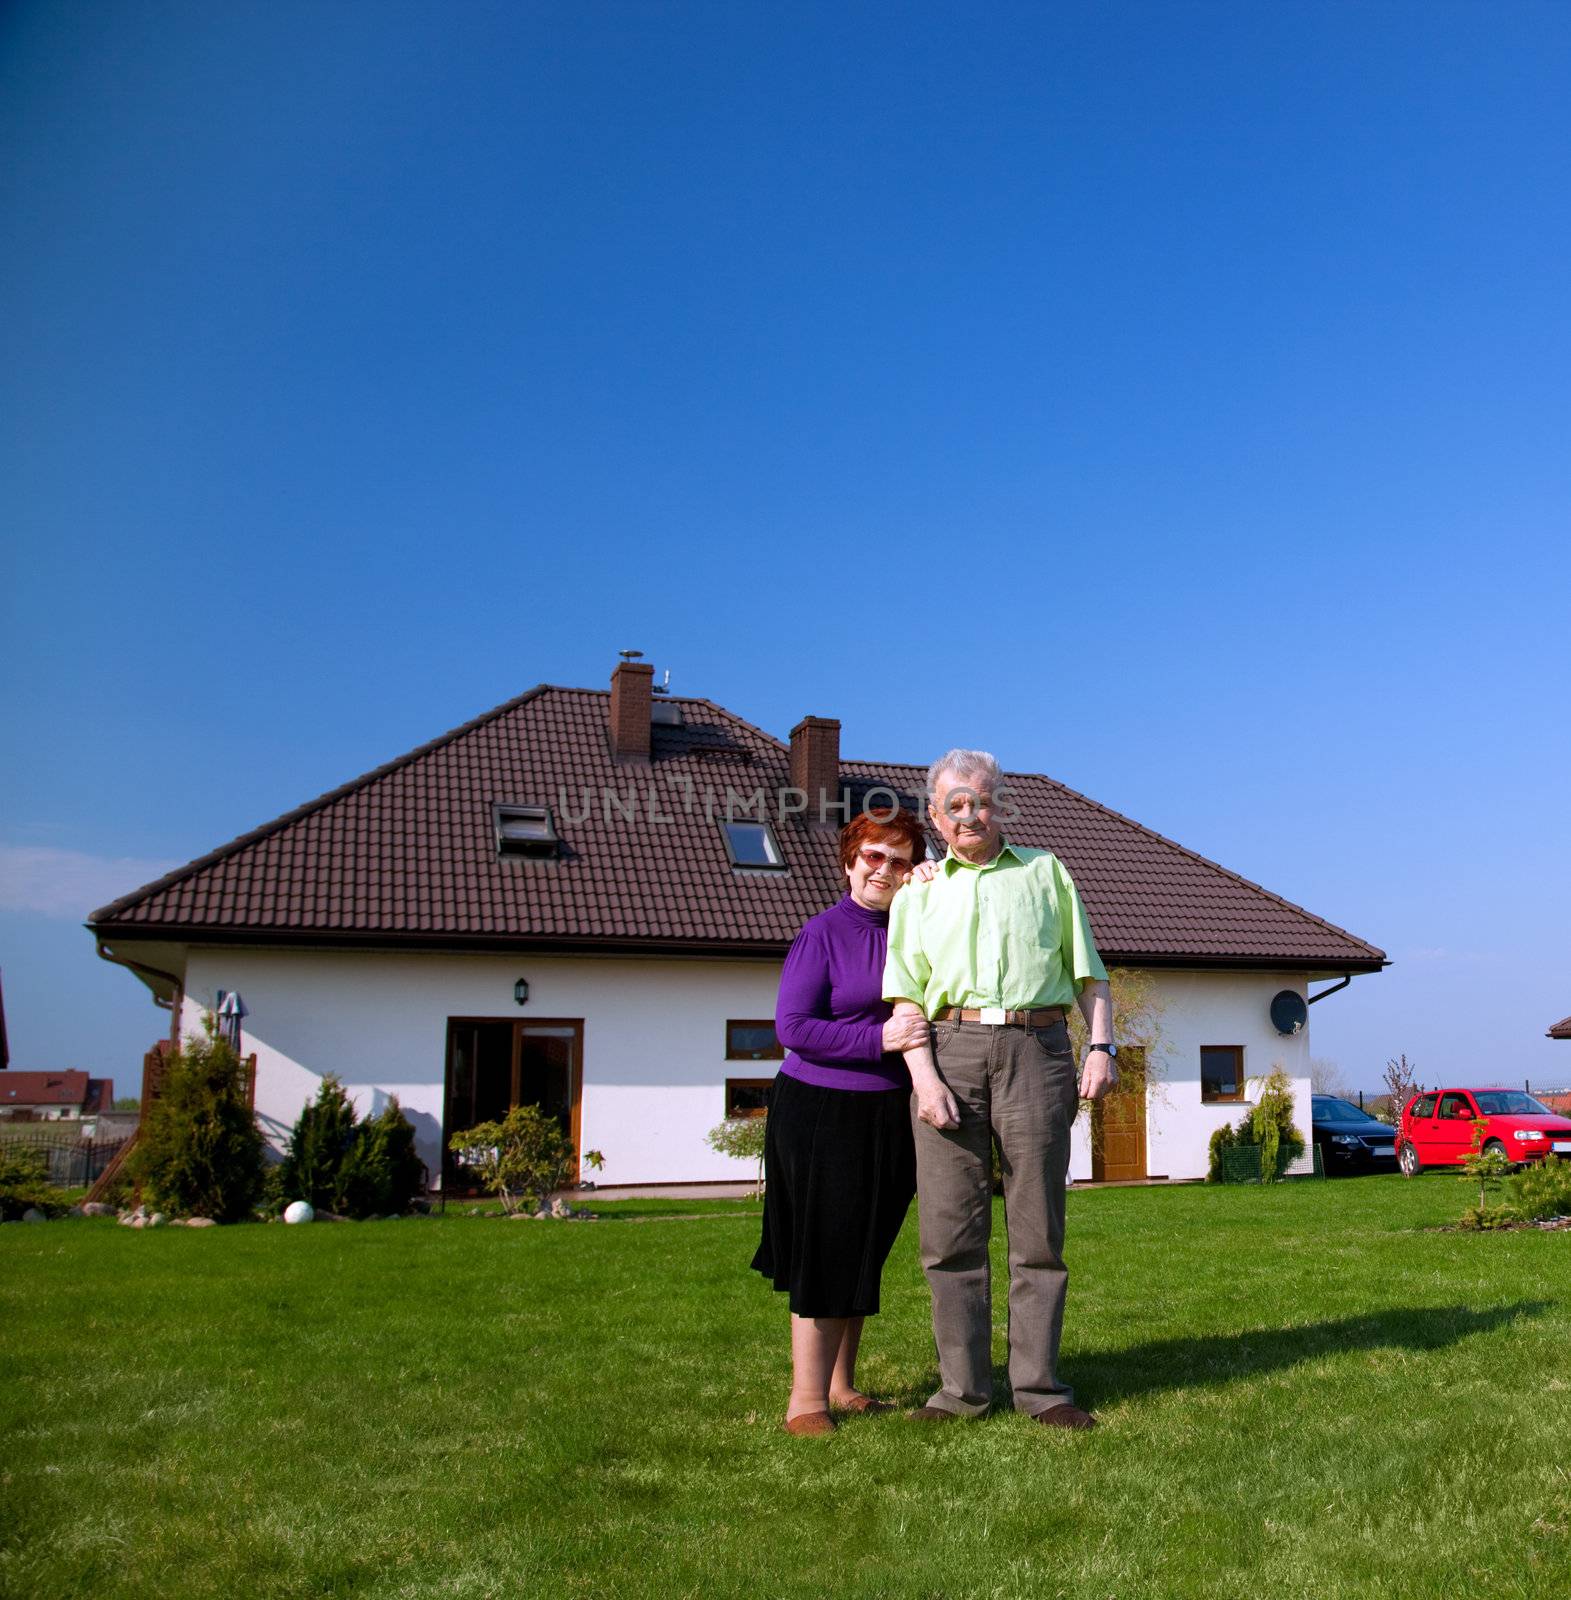 Senior smiling couple in front of their new house